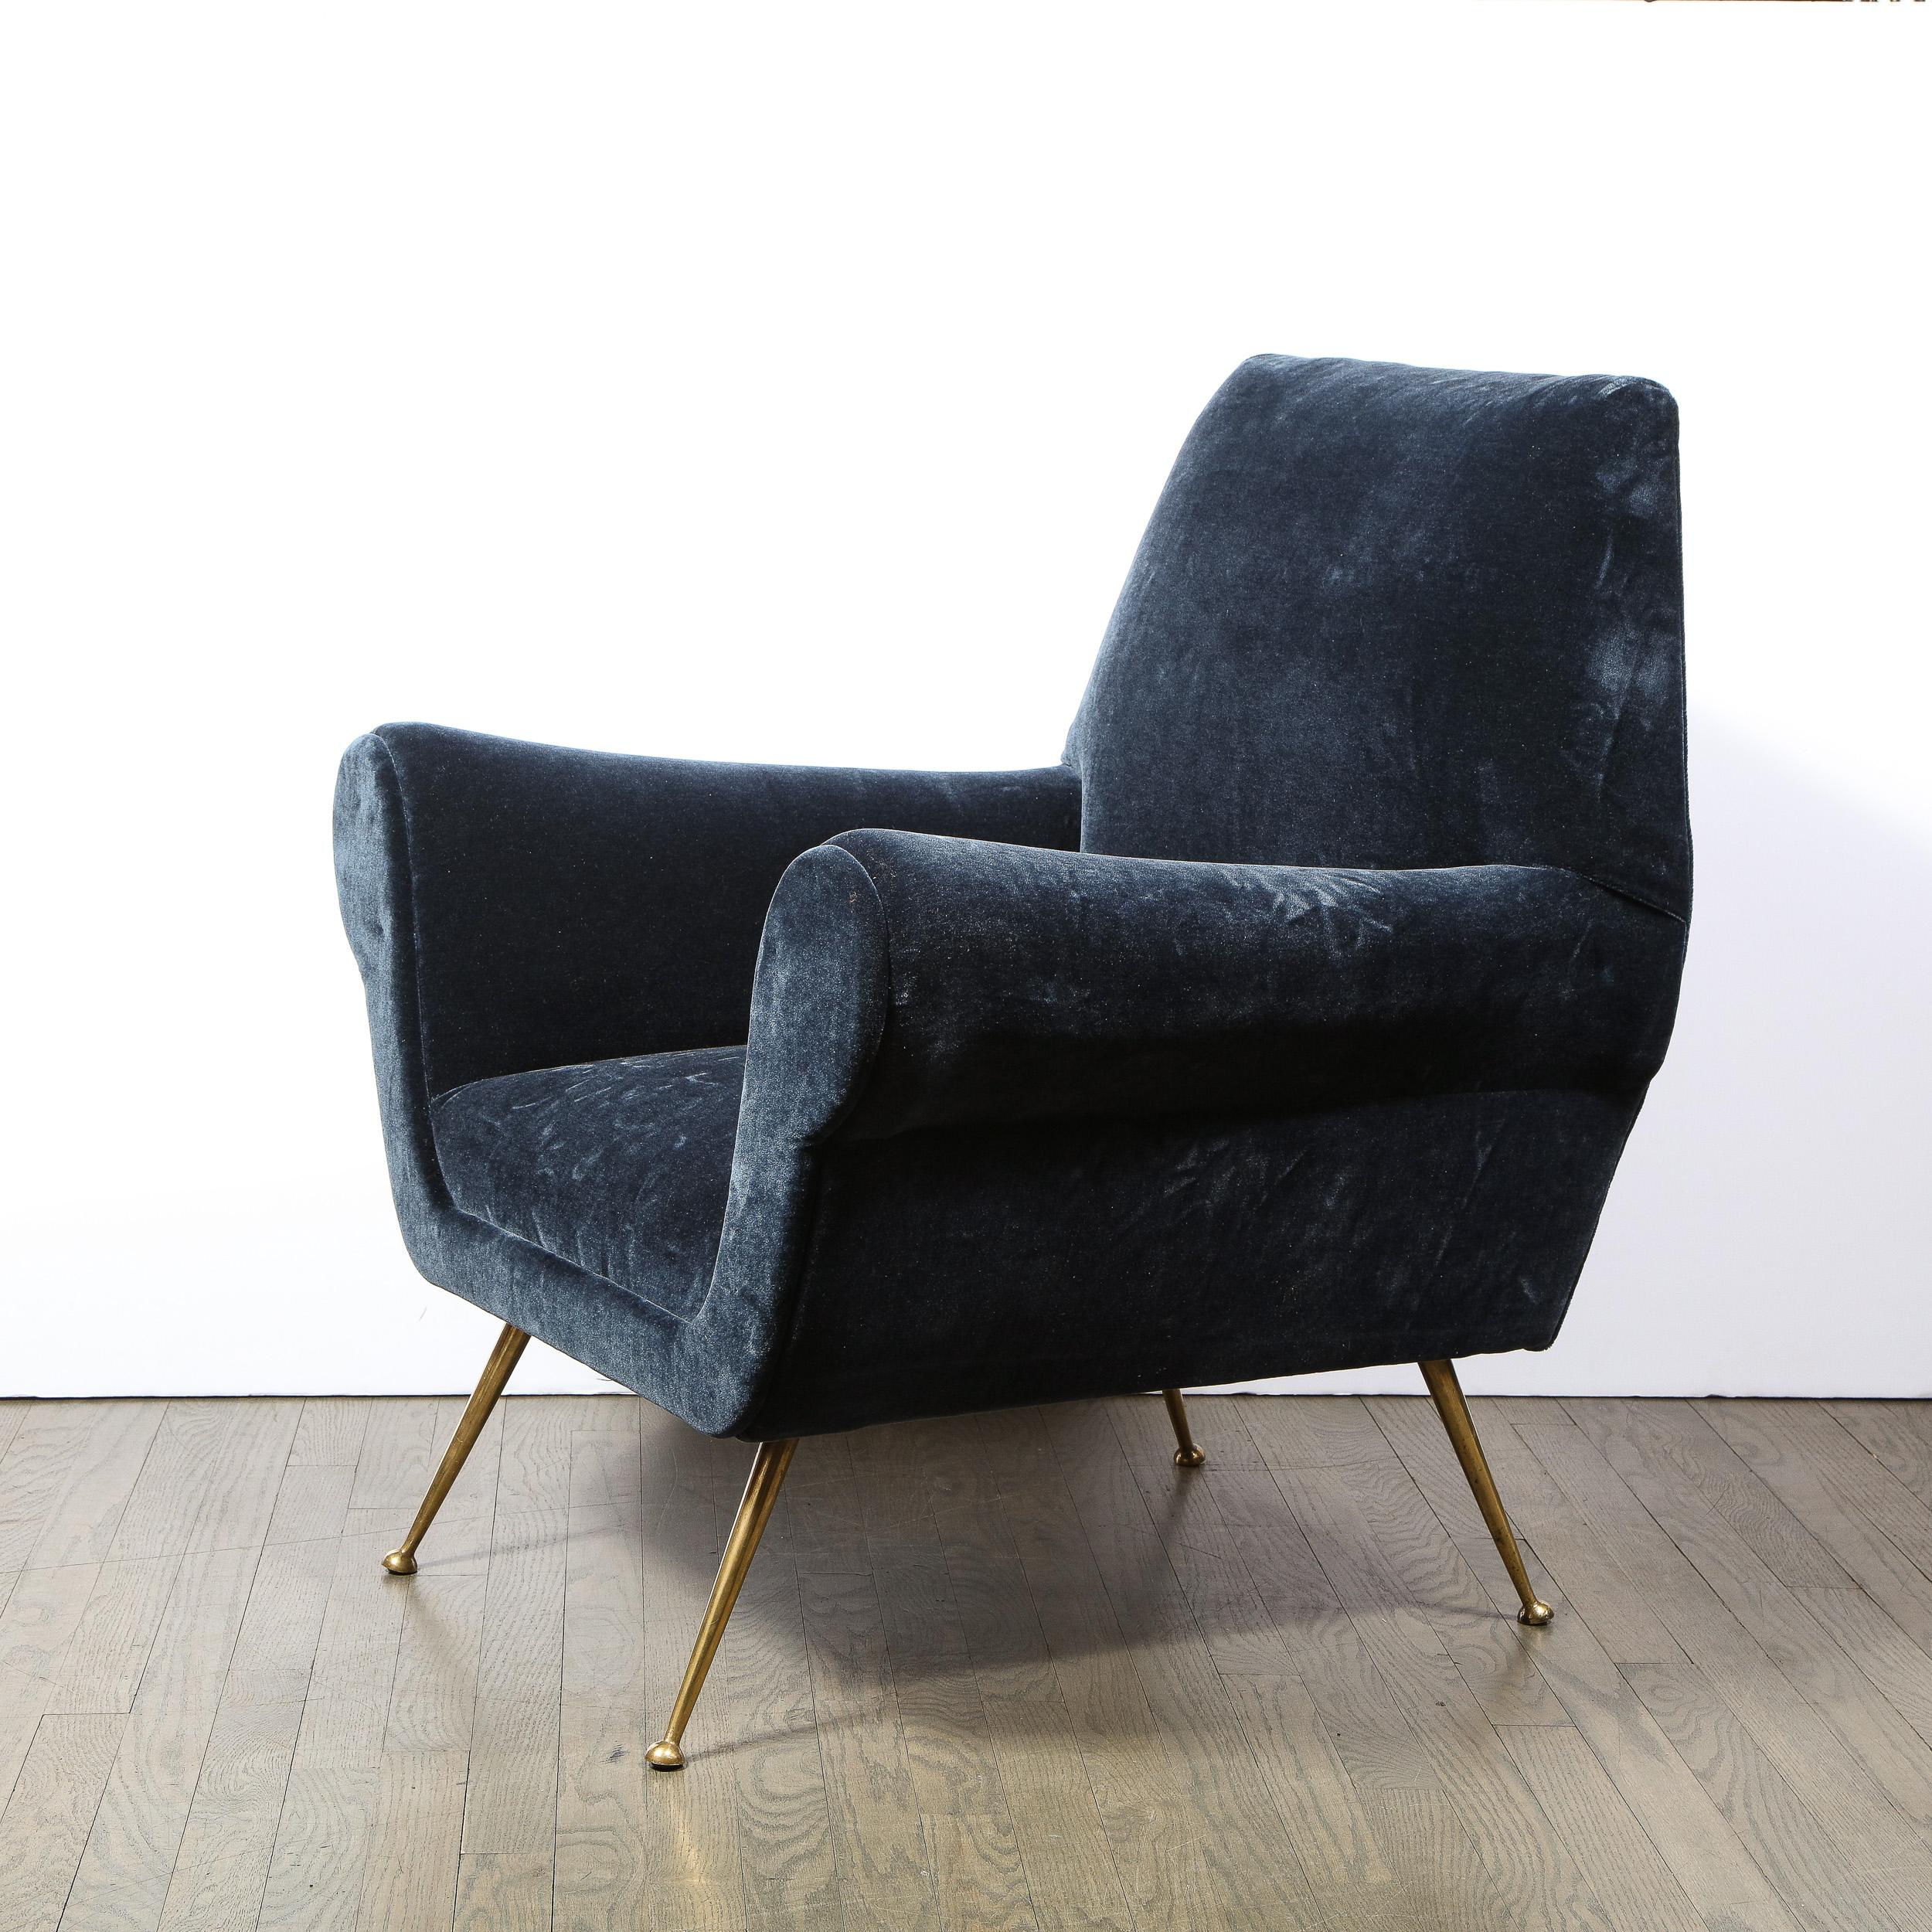 Mid-20th Century Pair of Mid-Century Modern Marco Zanuso Lounge Chairs with Sculptural Brass Legs